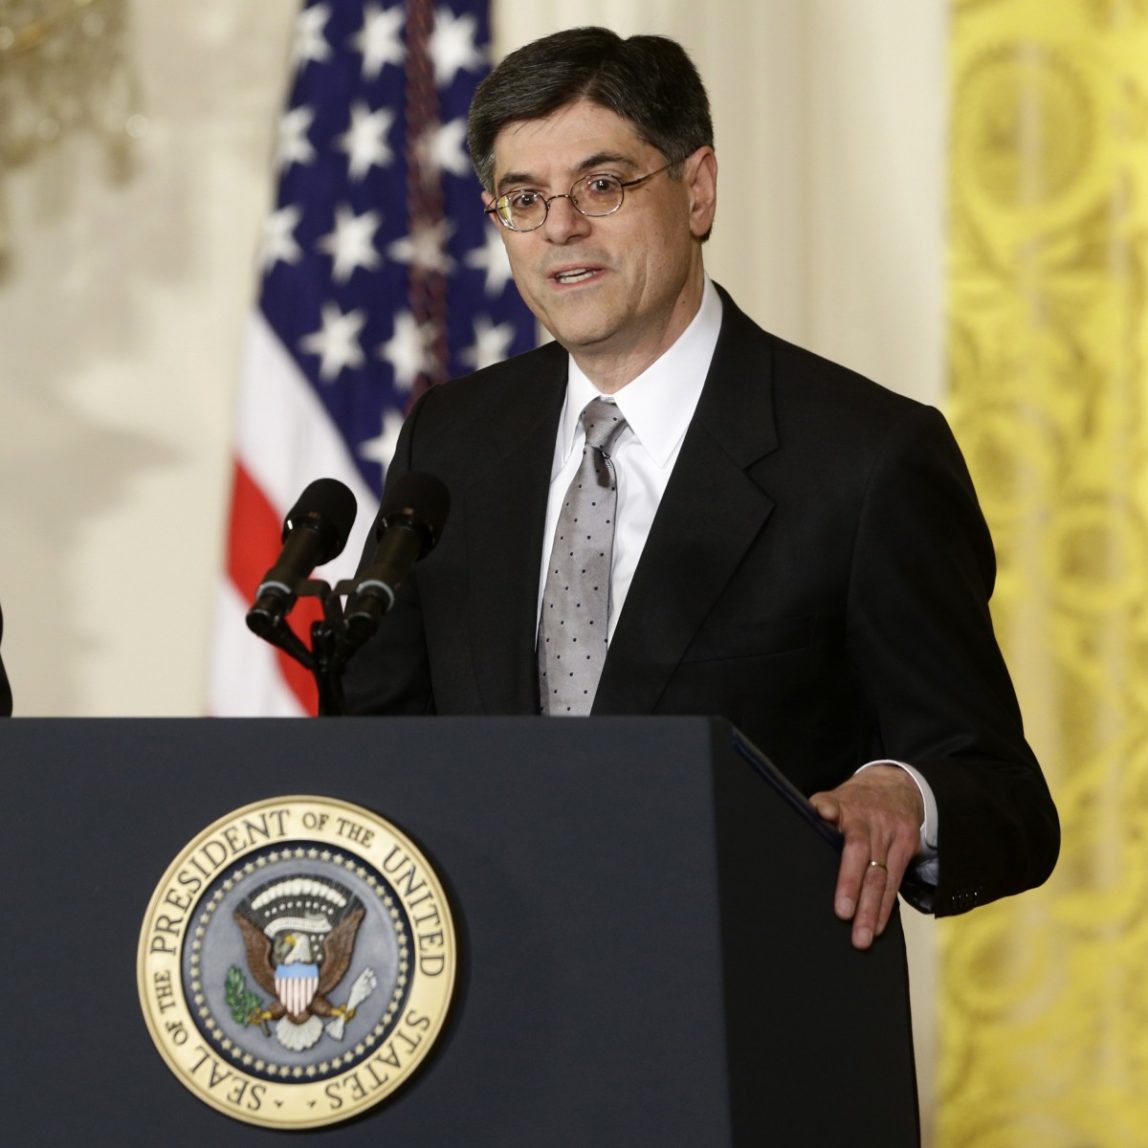 President Barack Obama listens as current White House Chief of Staff Jack Lew speaks in the East Room of the White House in Washington, Thursday, Jan. 10, 2013, where he announced he will nominate Lew as the next Treasury Secretary. (AP Photo/Charles Dharapak)